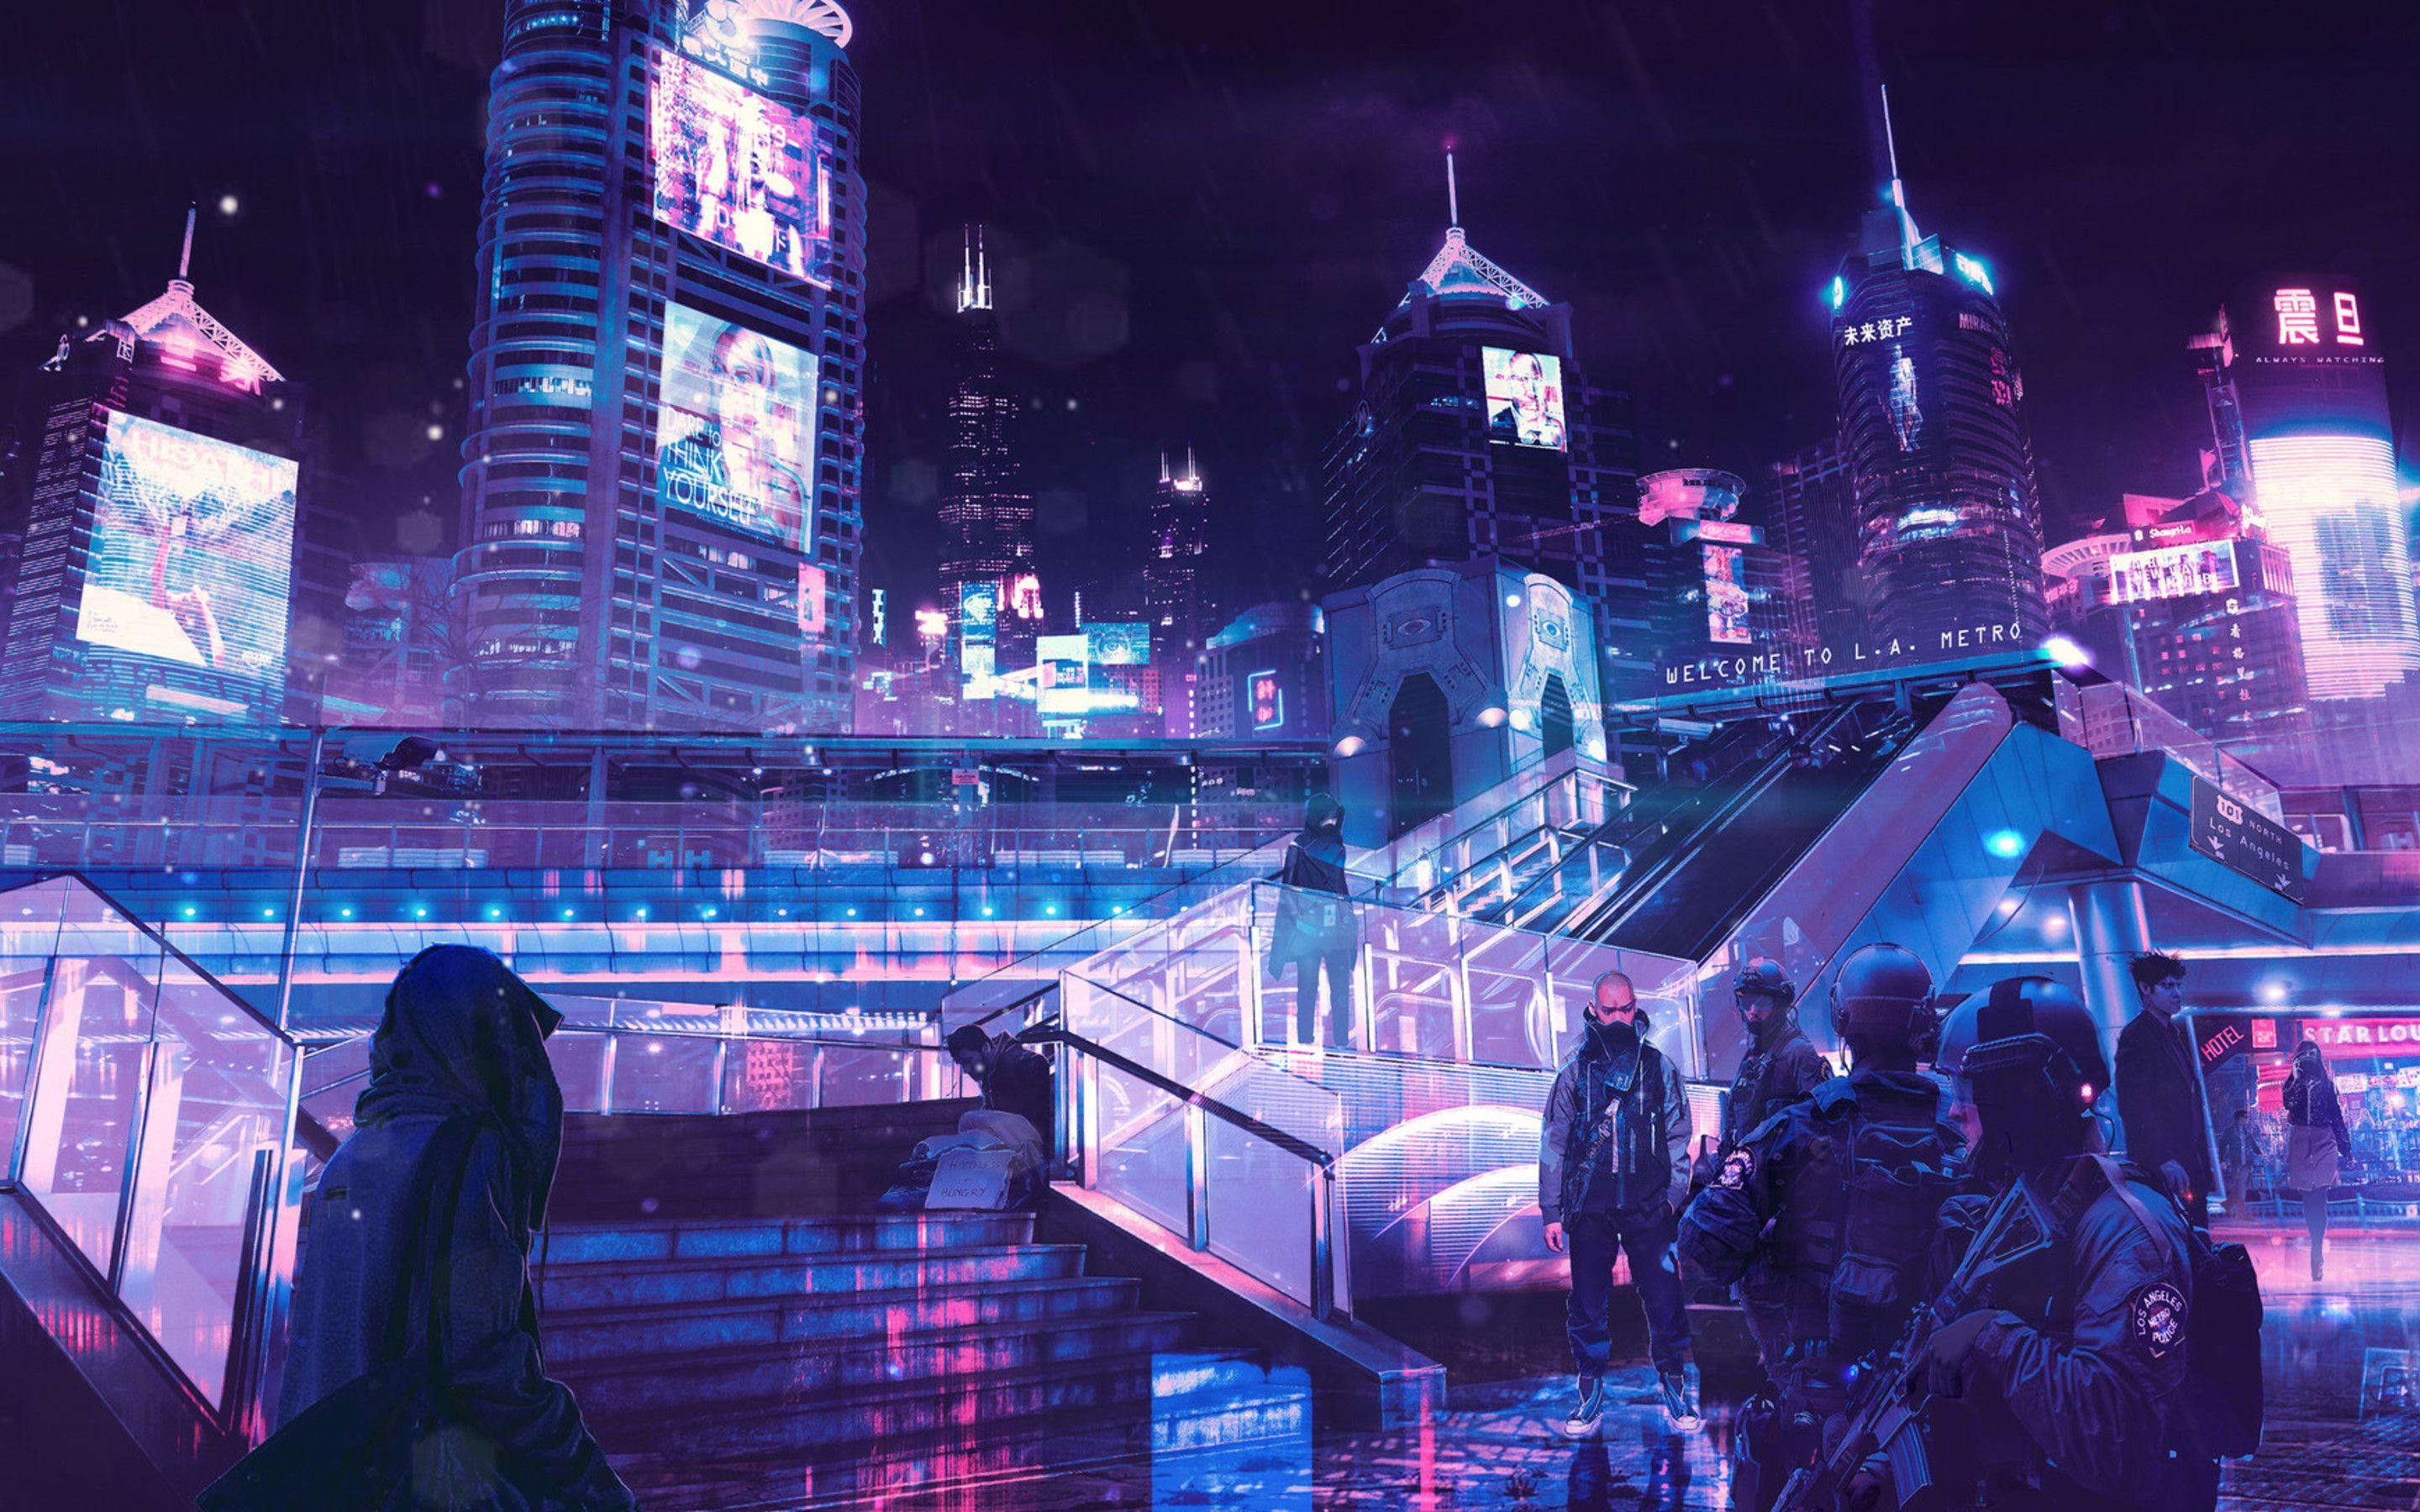 Cyberpunk Aesthetic Pictures  Download Free Images on Unsplash